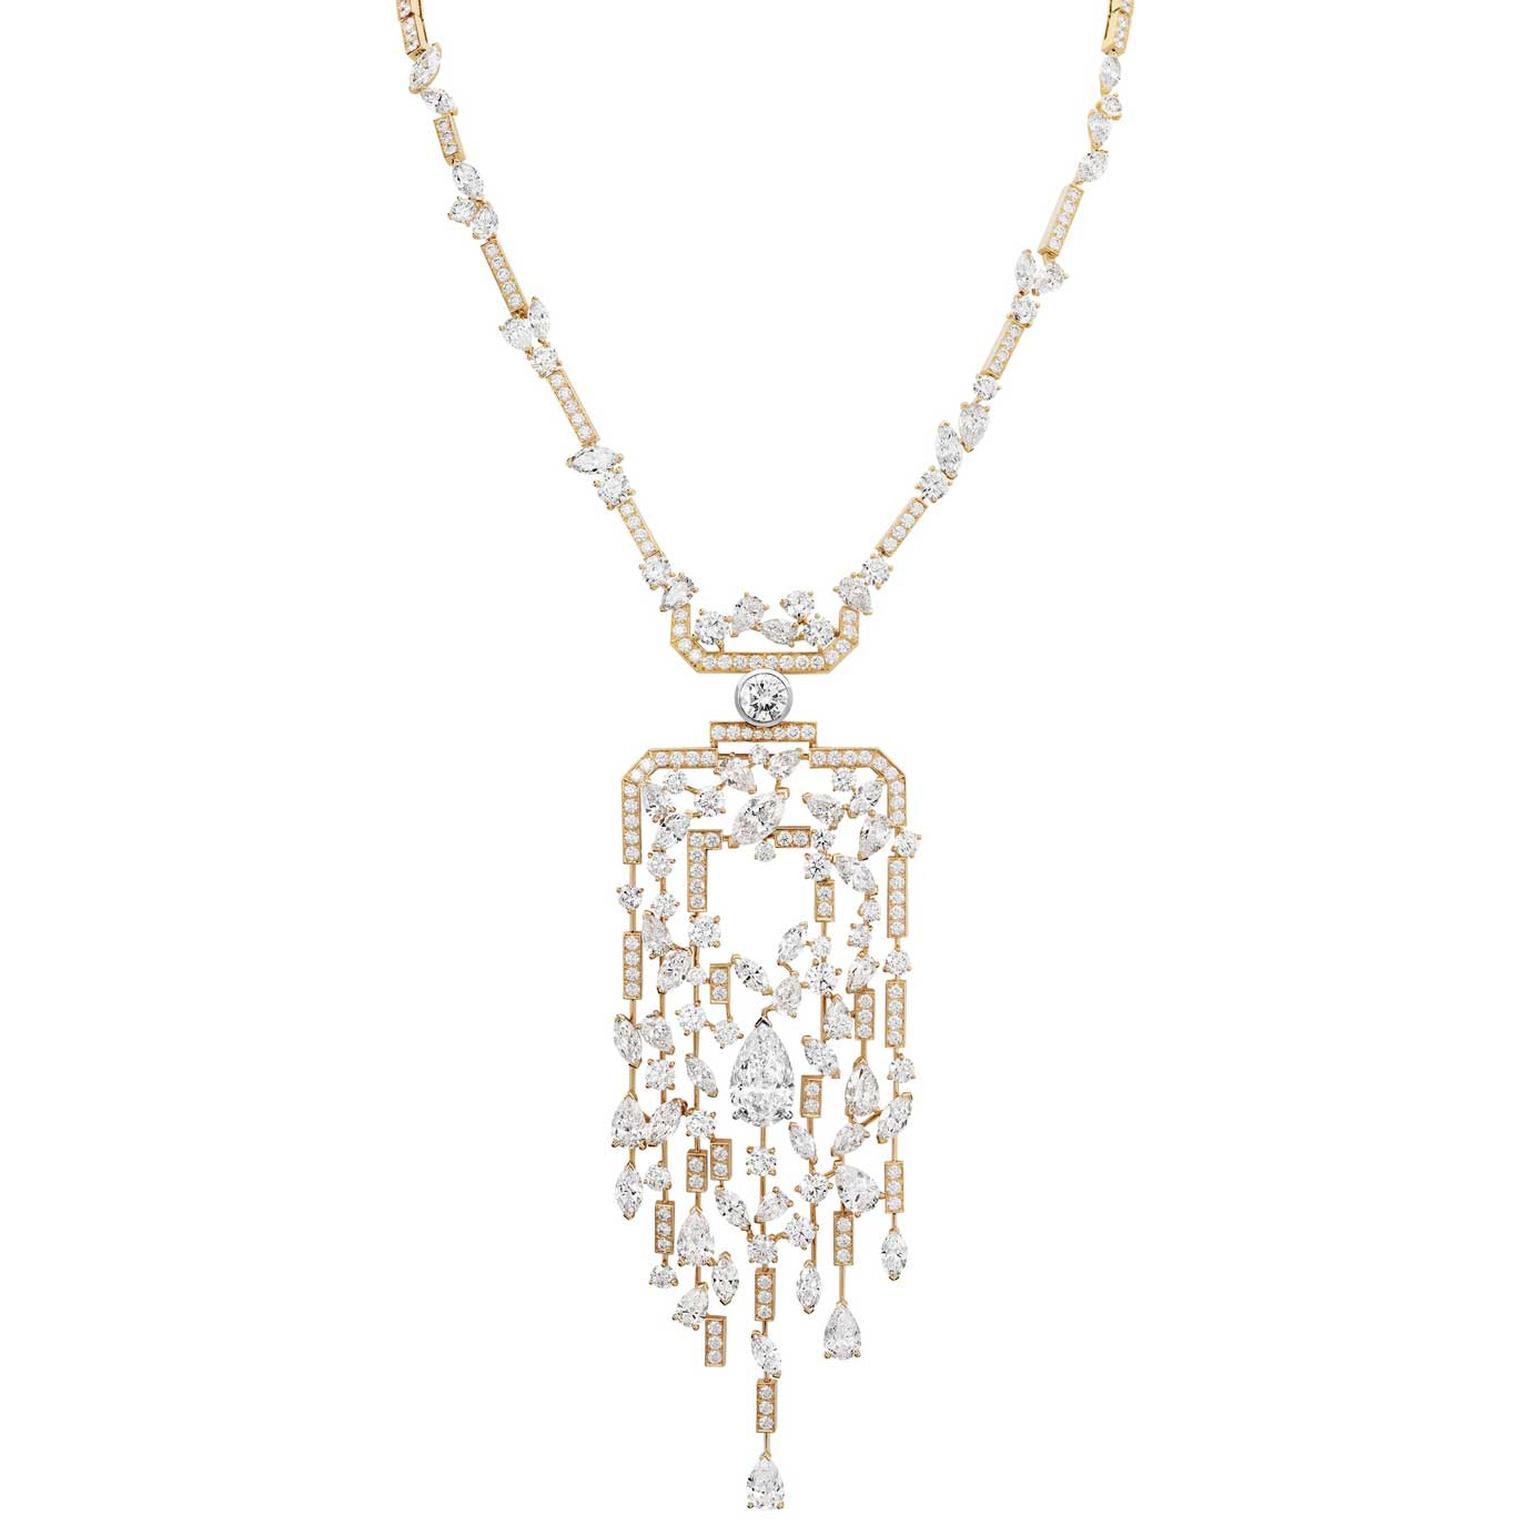 Chanel Collection No 5 SPARKLING SILHOUETTE necklace